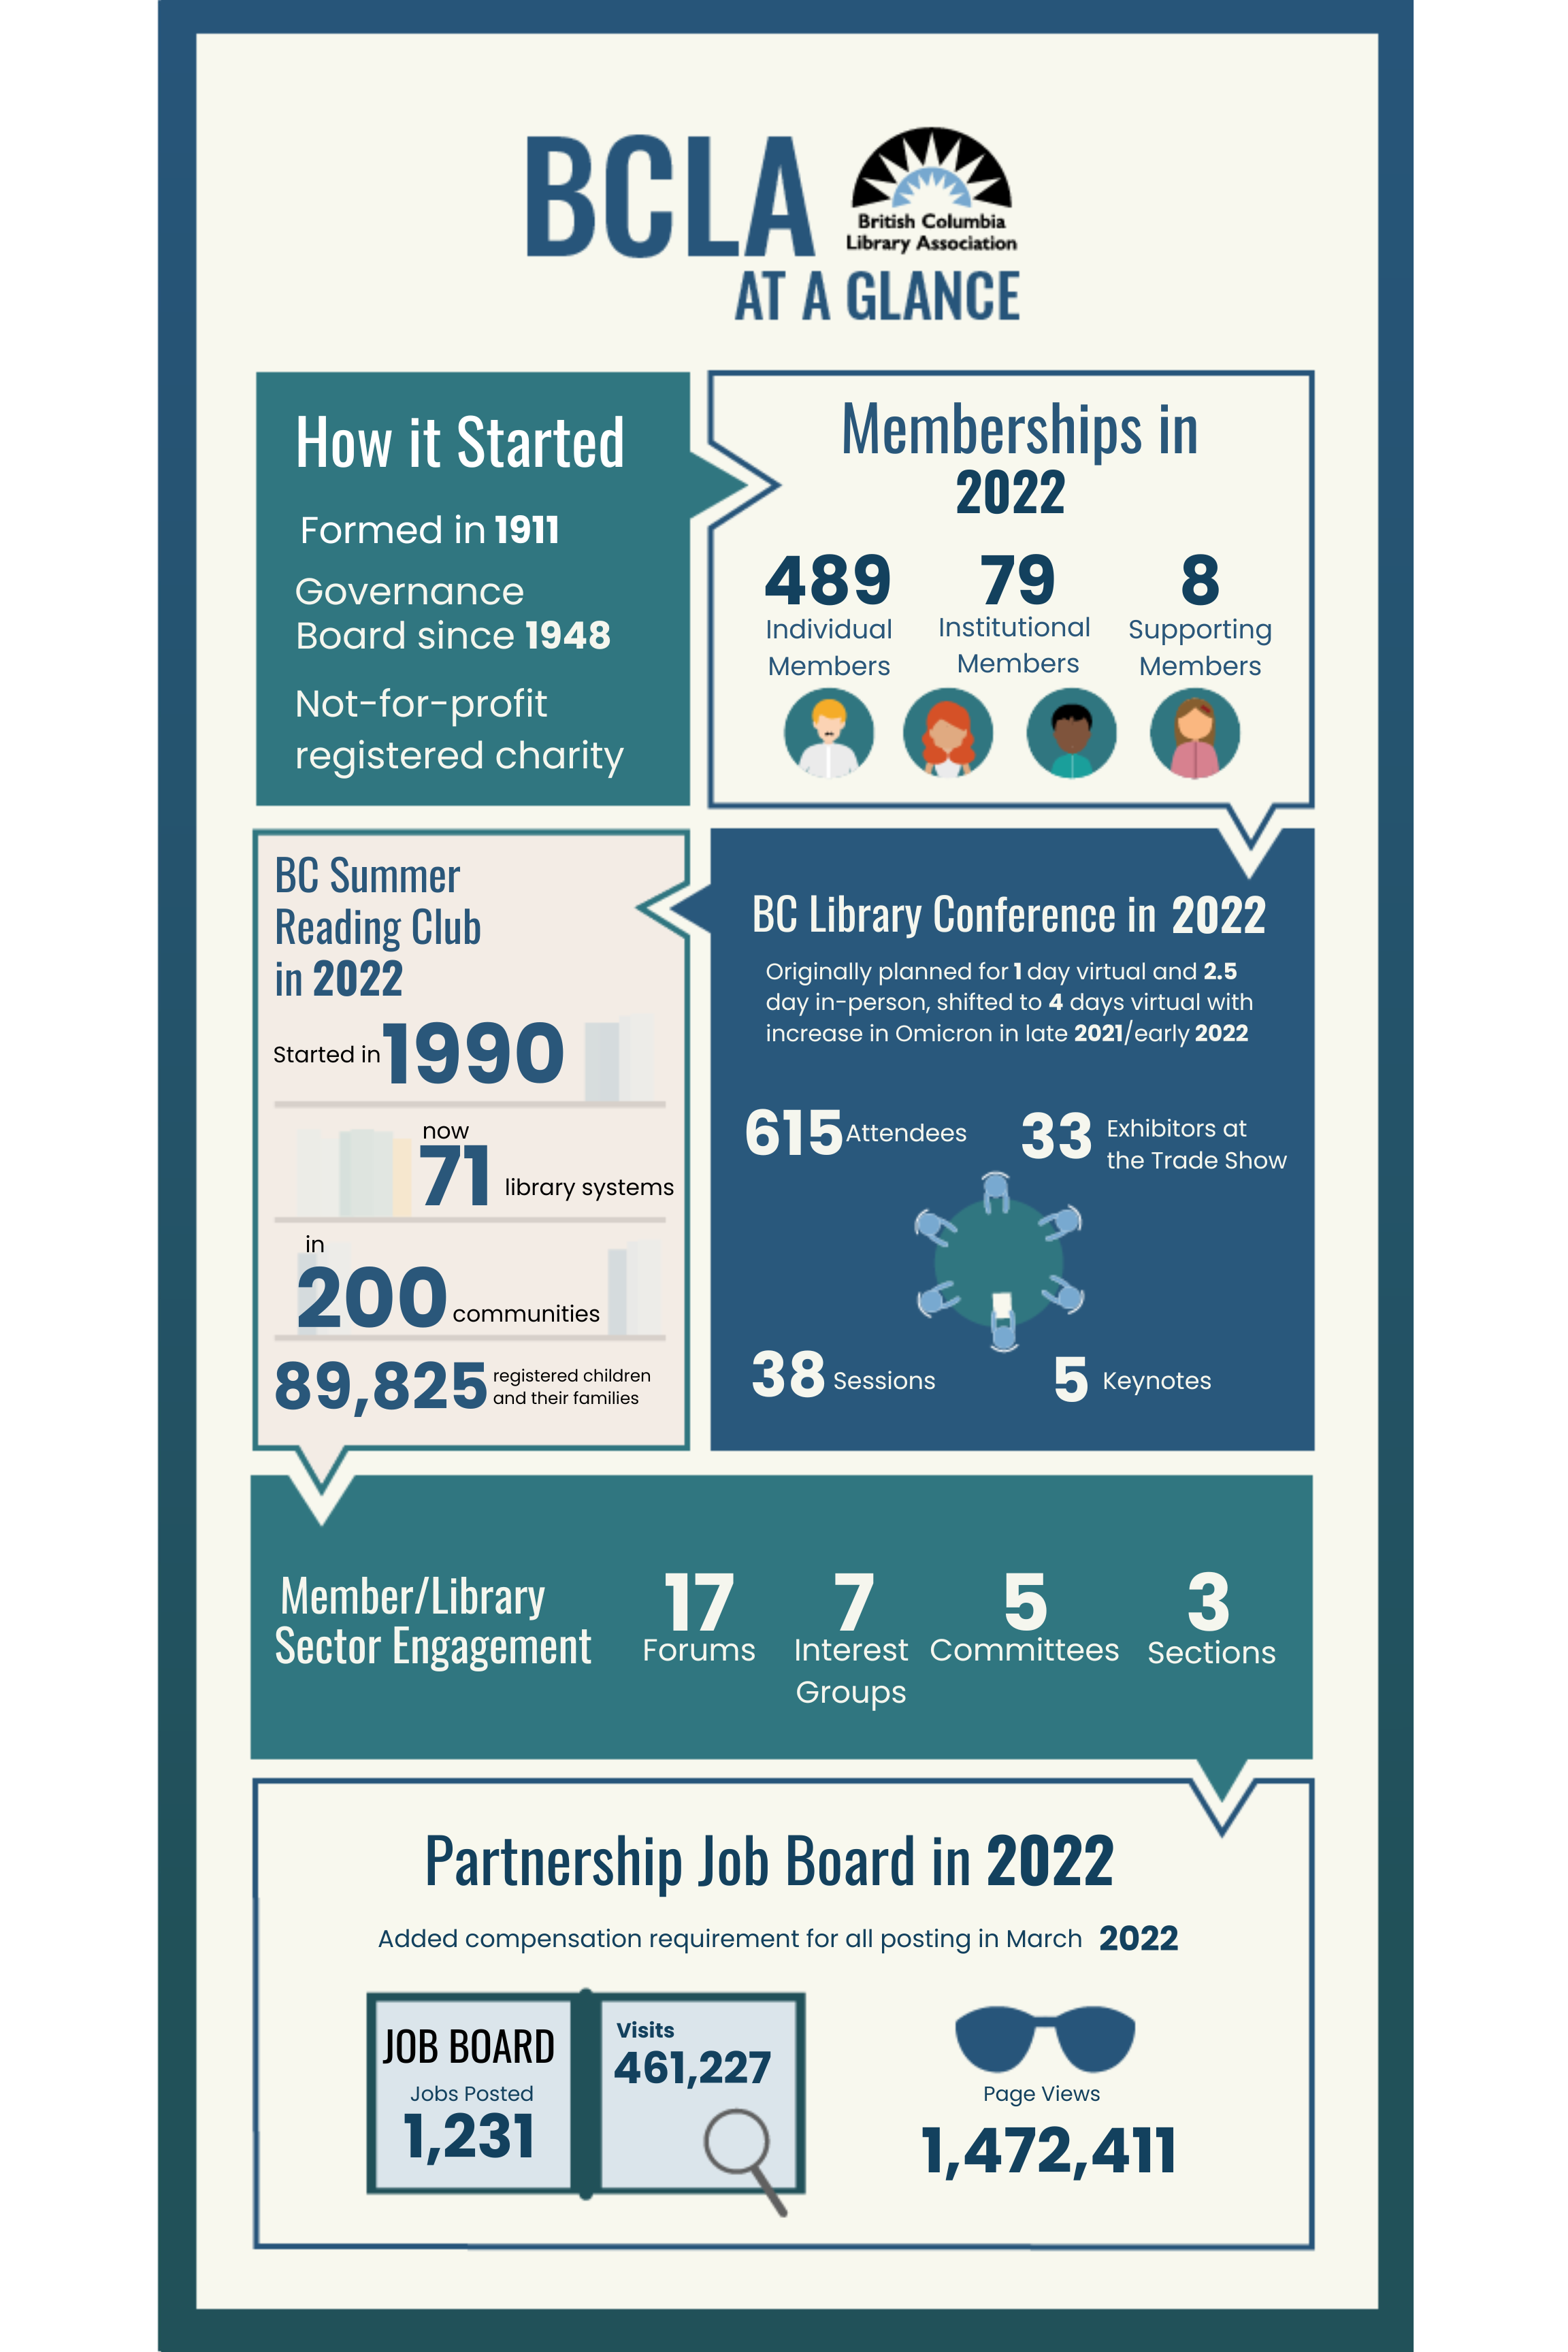 BCLA Infographic:<br />
How it Started<br />
Formed in 1911<br />
Governance Board since 1948<br />
Not-for-profit registered charity<br />
BC Summer Reading Club in 2022<br />
started in 1990<br />
Now 71 library systems<br />
in 200 communities<br />
89,825 registered children and their families</p>
<p>BC Library Conference in 2022<br />
Originally planned for 1 day virtual and 2.5<br />
day in-person, shifted to 4 davs virtual with<br />
increase in Omicron in late 2021/early 2022<br />
615 Attendees<br />
33 Exhibitors at the Trade Show<br />
38 Sessions<br />
5 Keynotes<br />
Member/Library Sector Engagement<br />
17 Forums<br />
7 Interest Groups<br />
5 Committees<br />
3 Sections</p>
<p>Partnership Job Board in 2022<br />
Added compensation requirement for all postings in March 2022<br />
JOB BOARD Jobs posted 1,231<br />
Visits 461,227<br />
Page Views 1,472,411<br />
